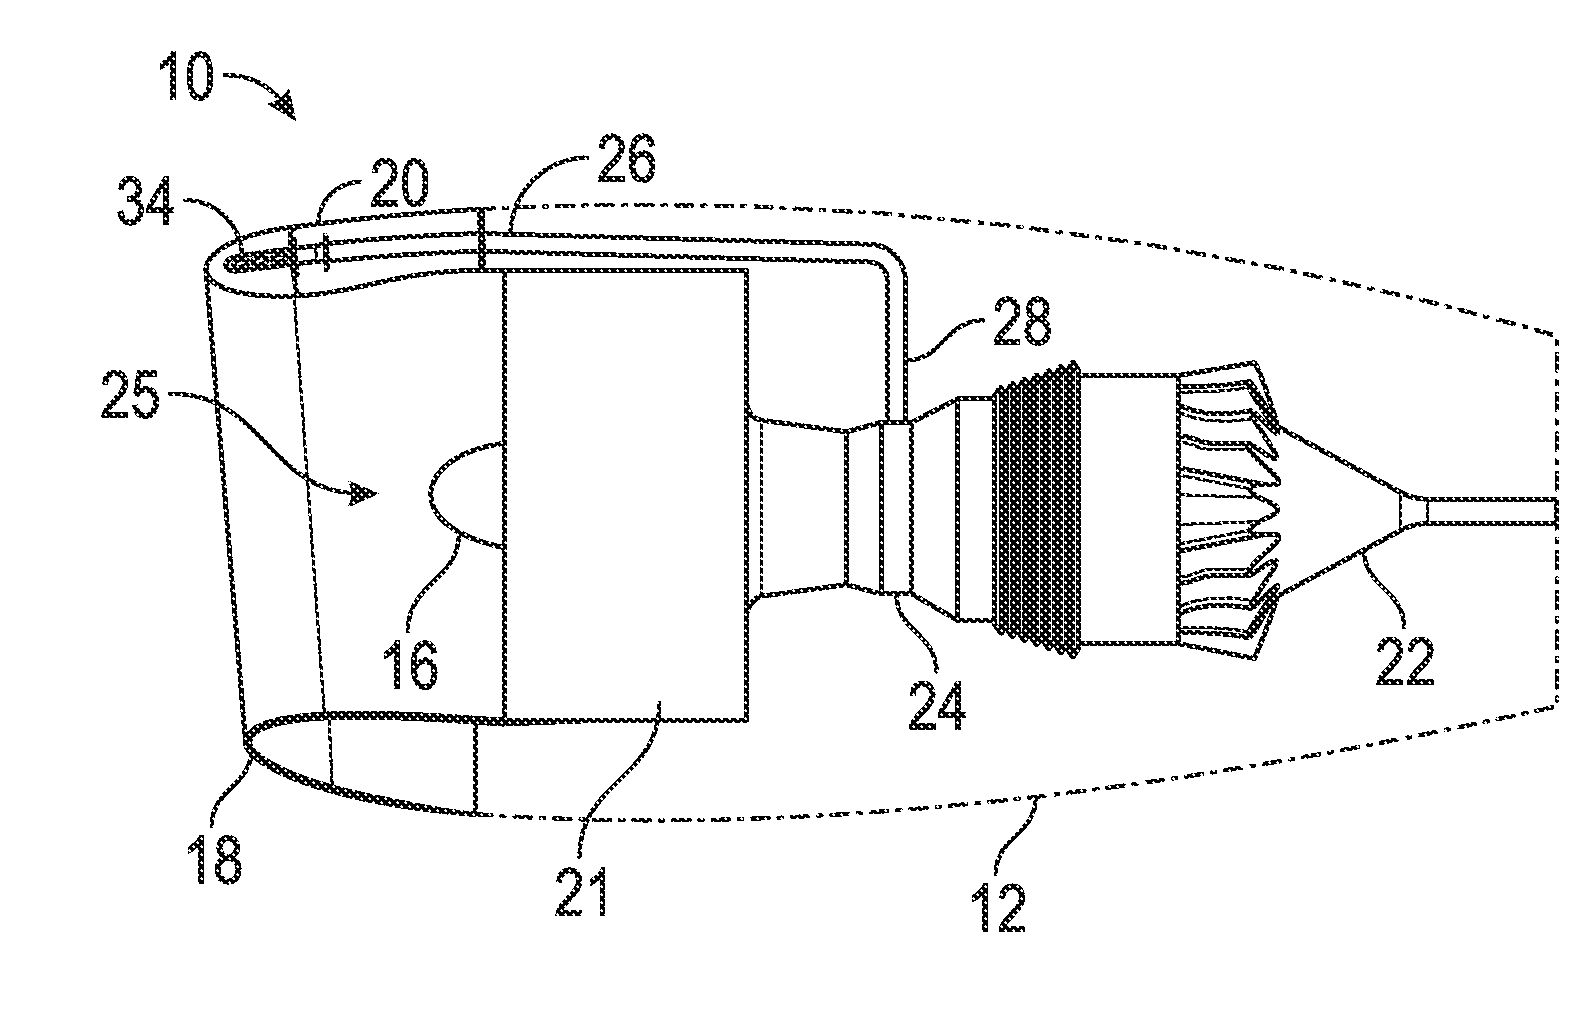 Injector nozzle configuration for swirl Anti-icing system